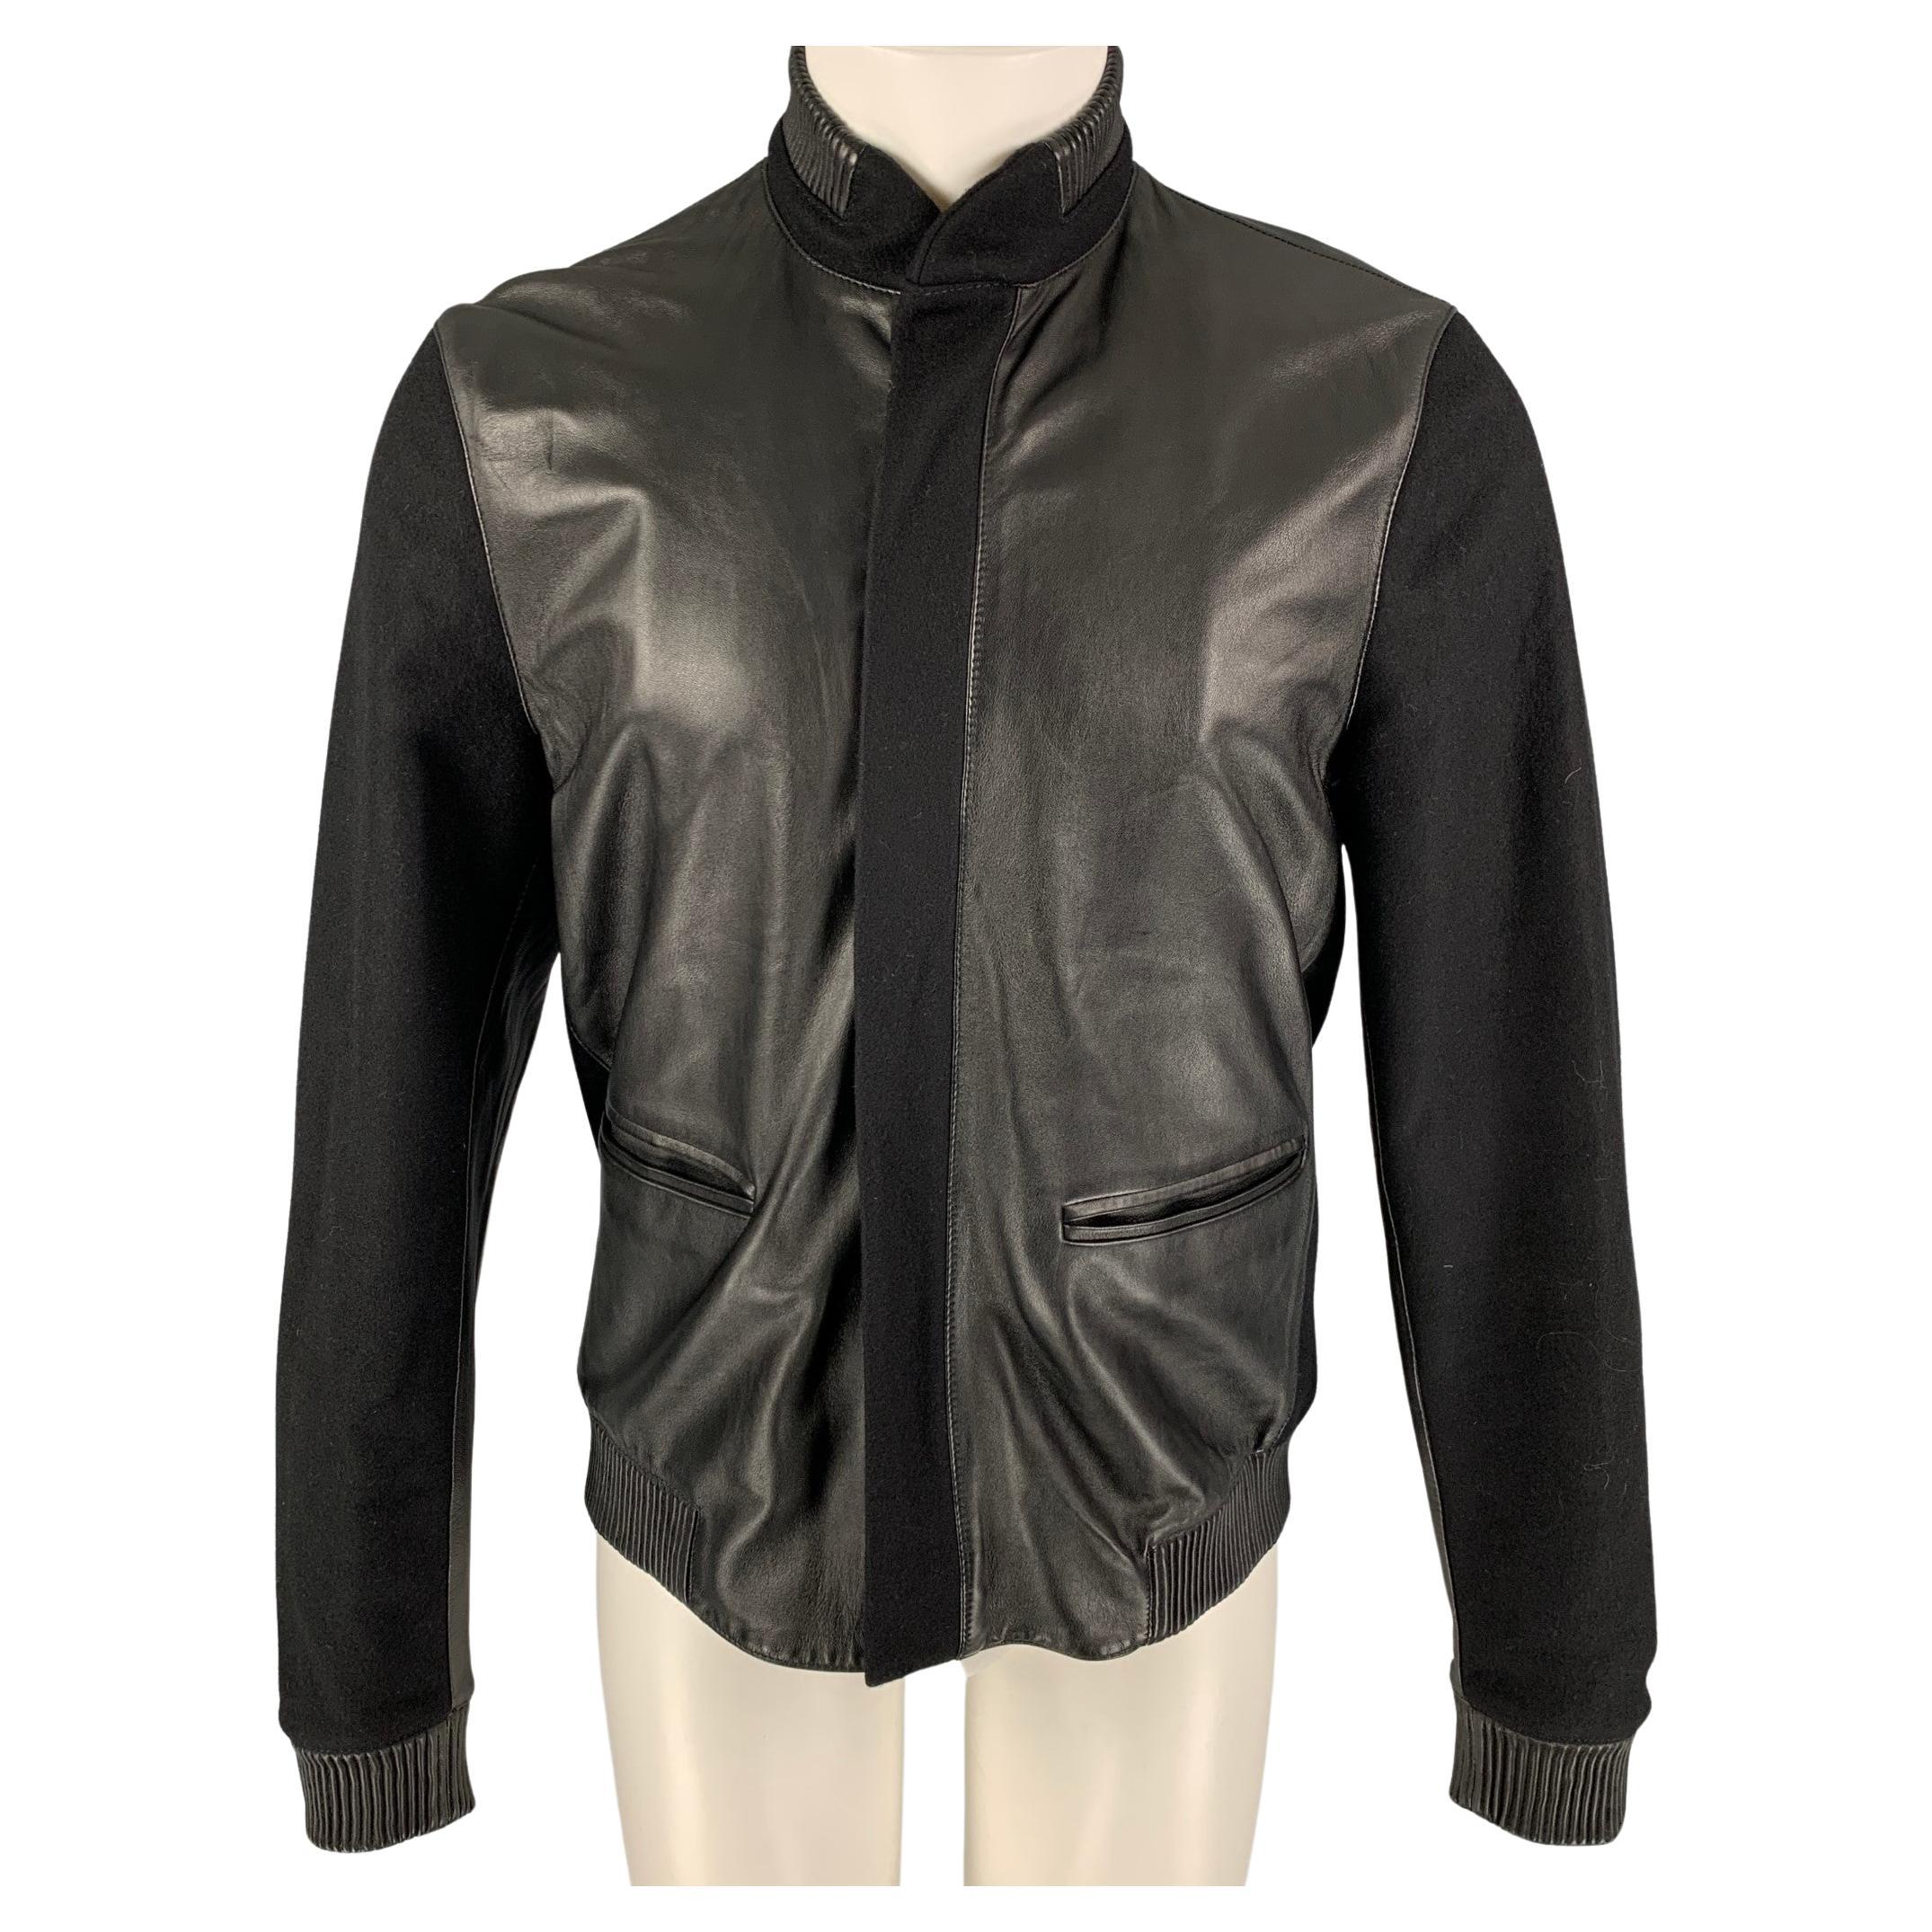 CALVIN KLEIN COLLECTION Size M Black Leather Canvas Bomber Jacket